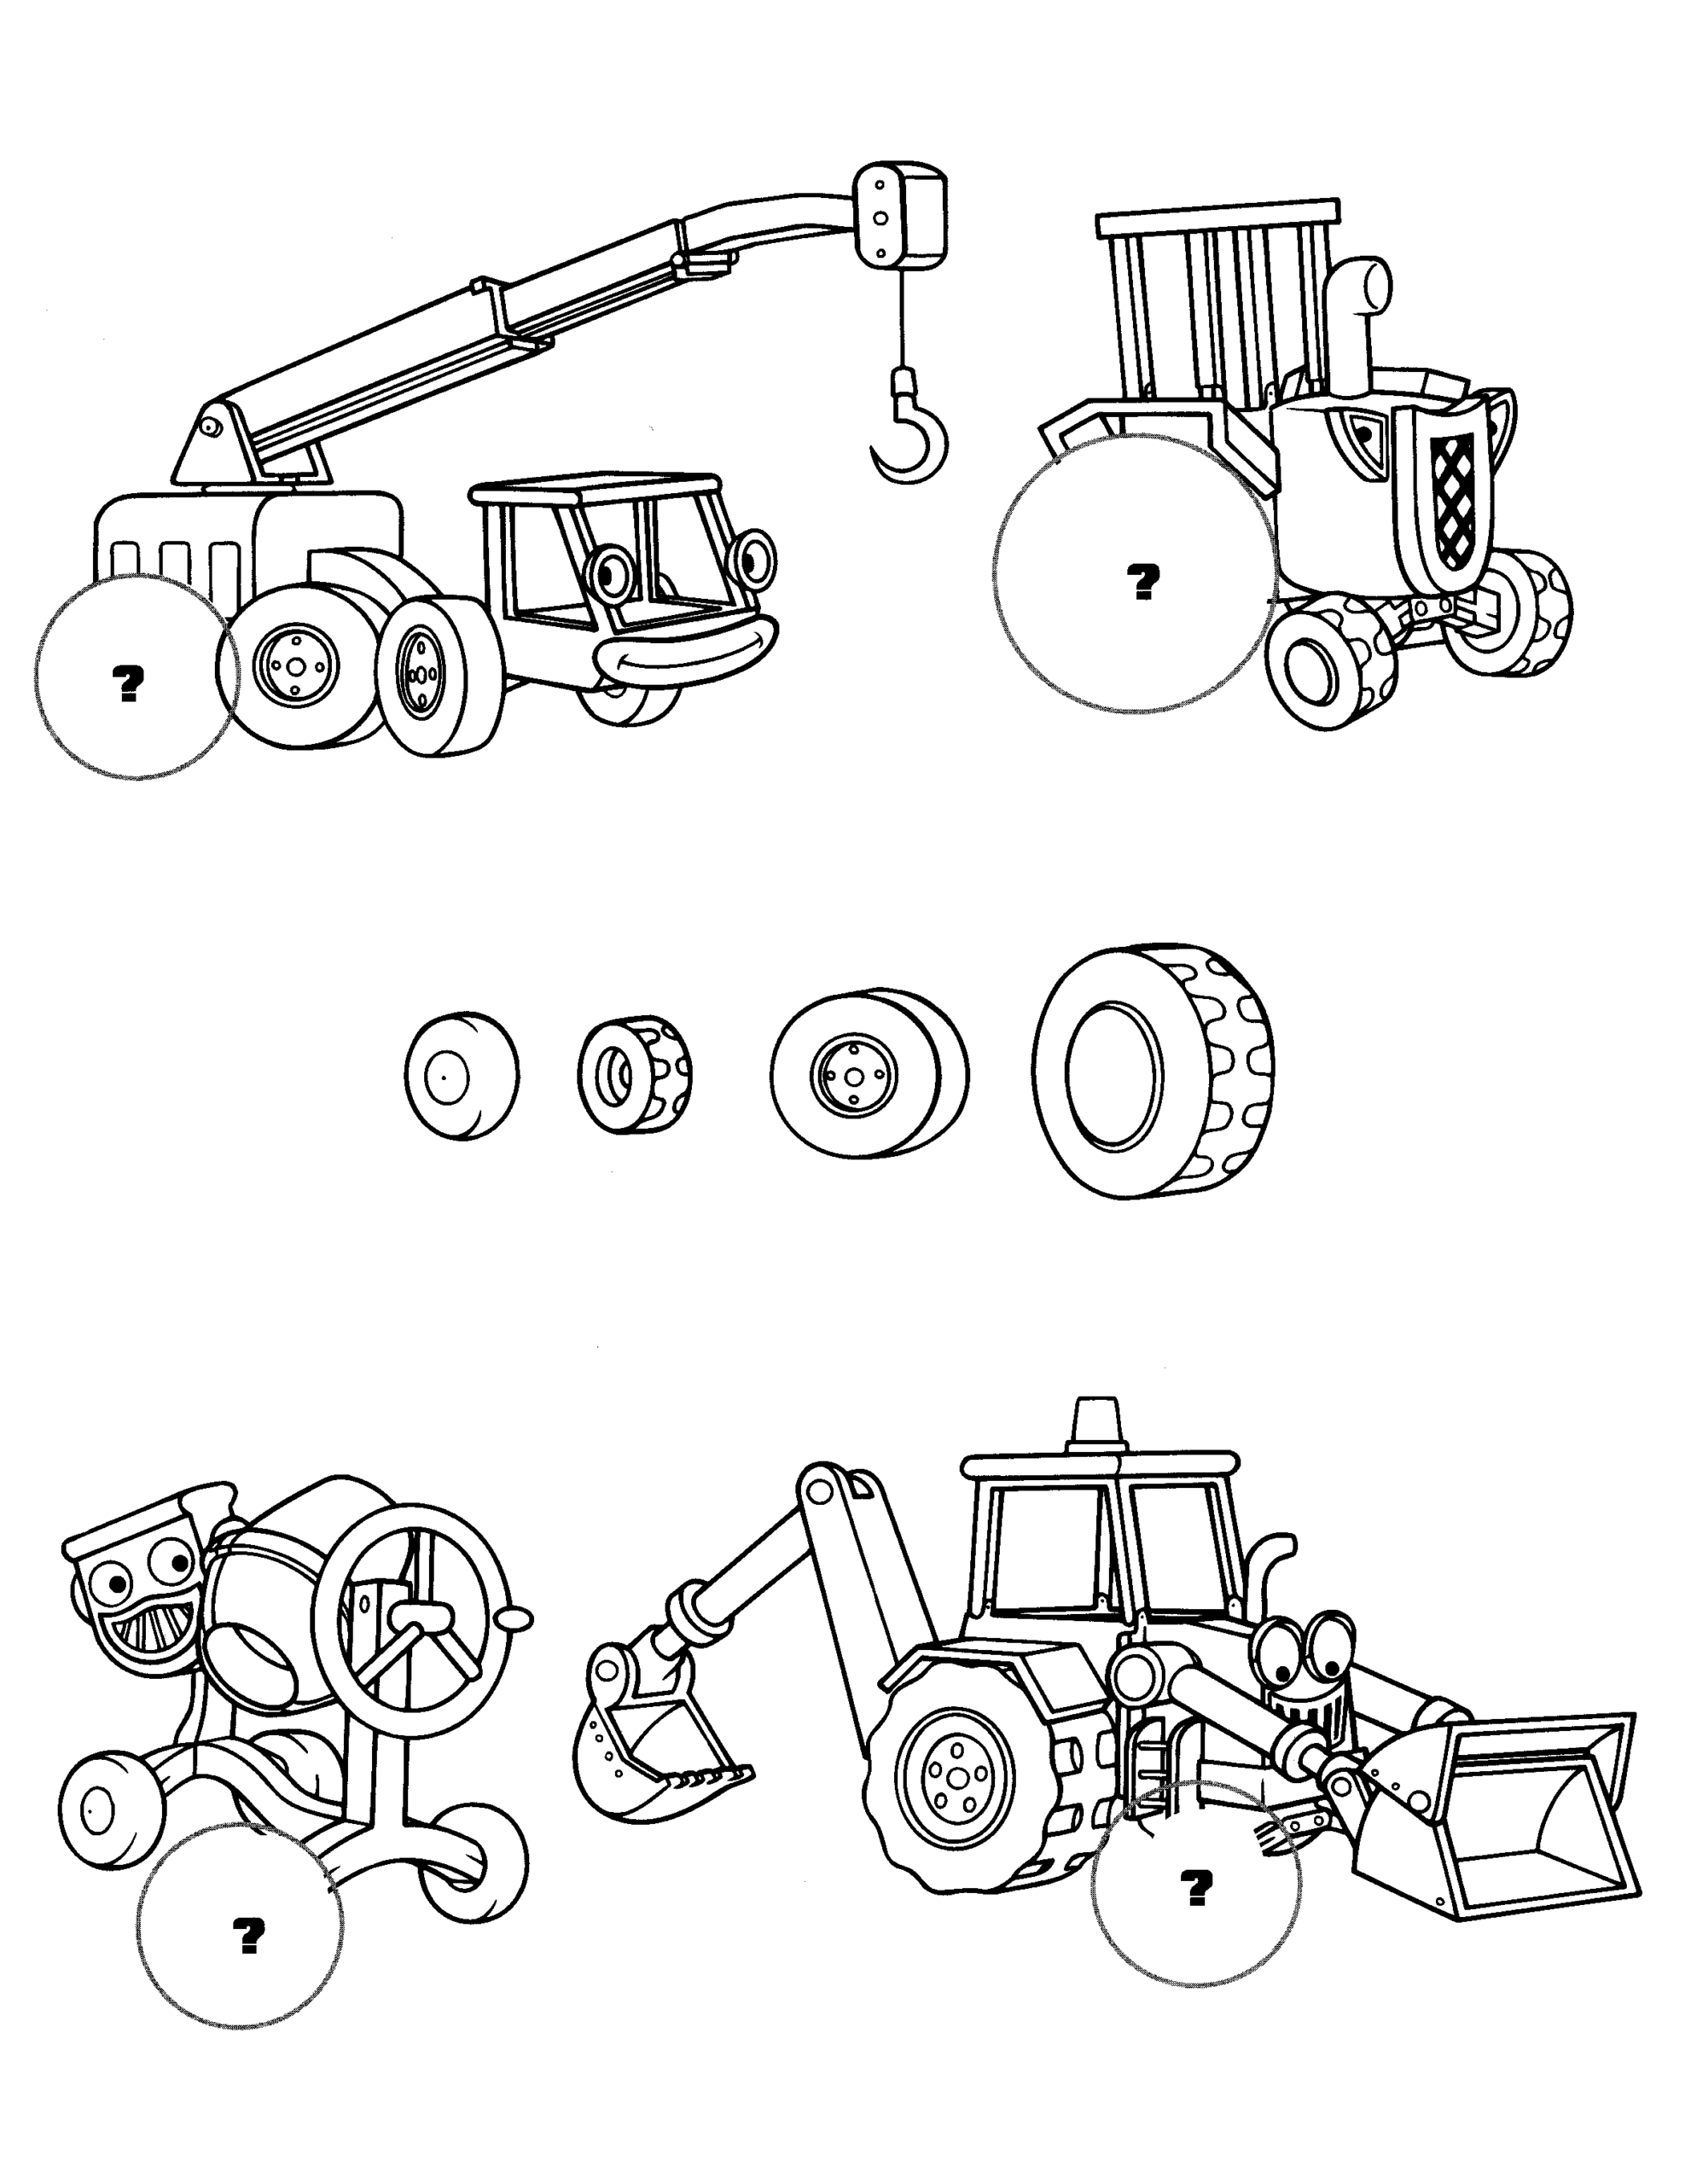 Bob the Builder Coloring Pages TV Film bob the builder 105 Printable 2020 01010 Coloring4free